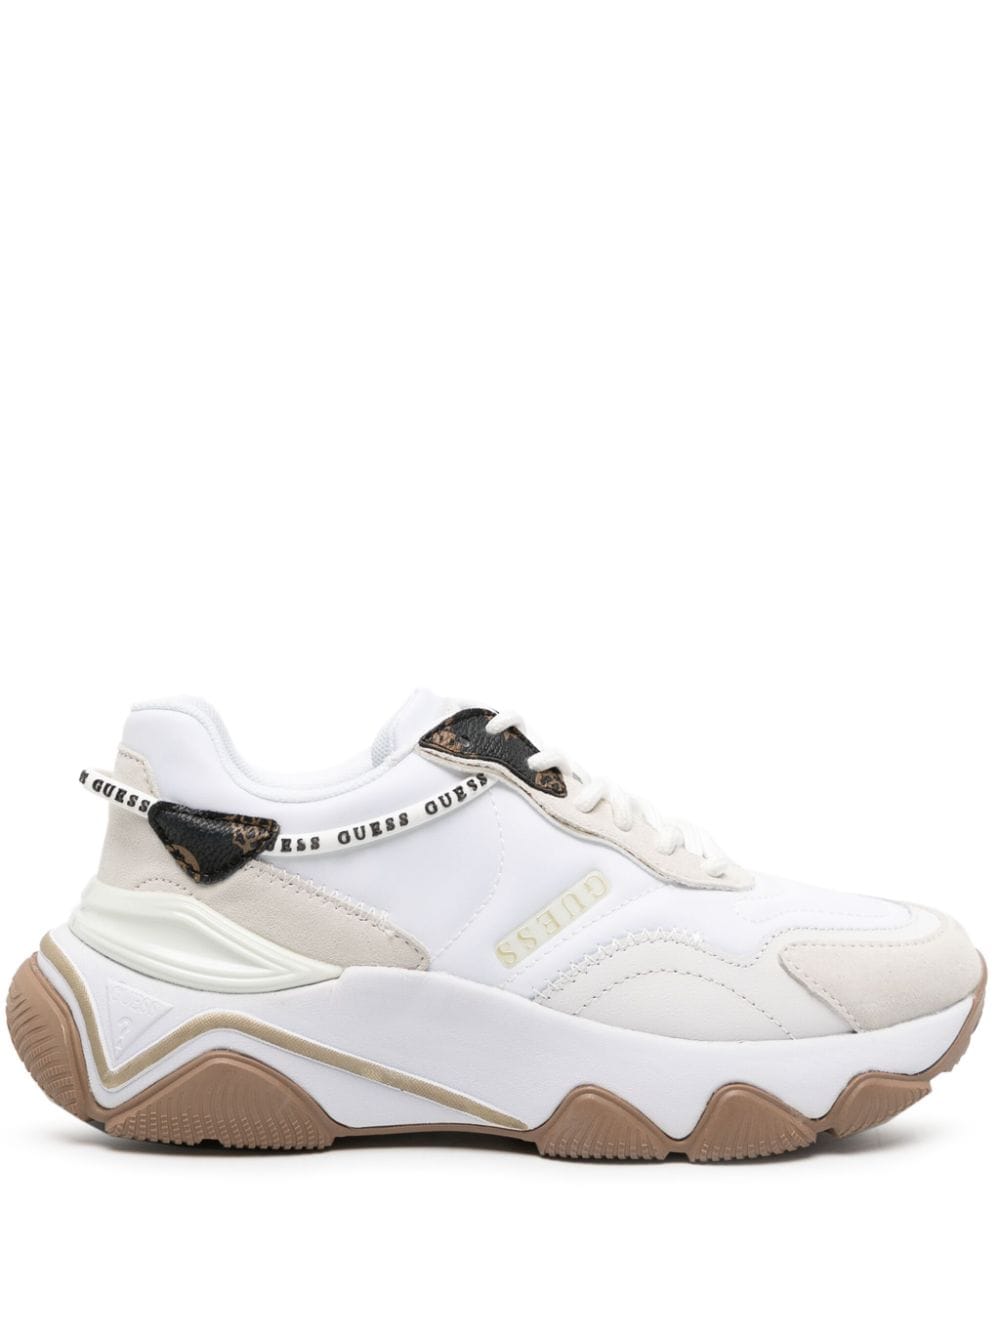 Guess Usa Micola Active Chunky Trainers In White